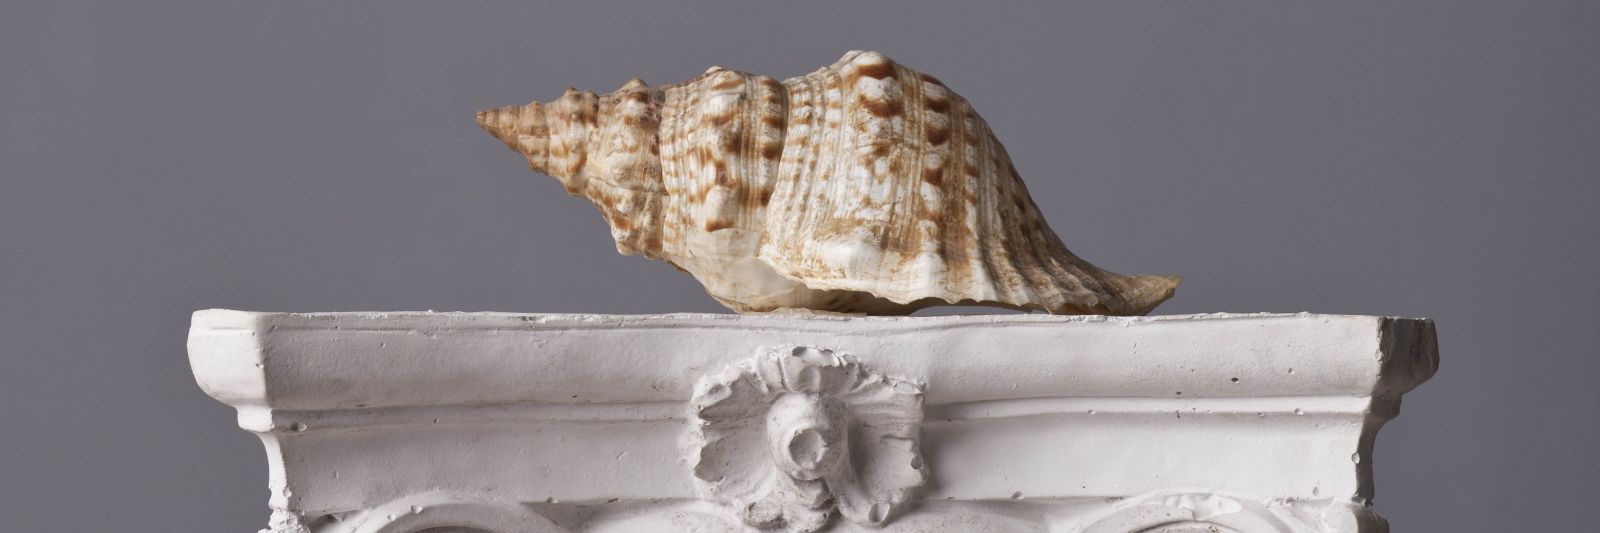 Conch Shell on Display at a Museum